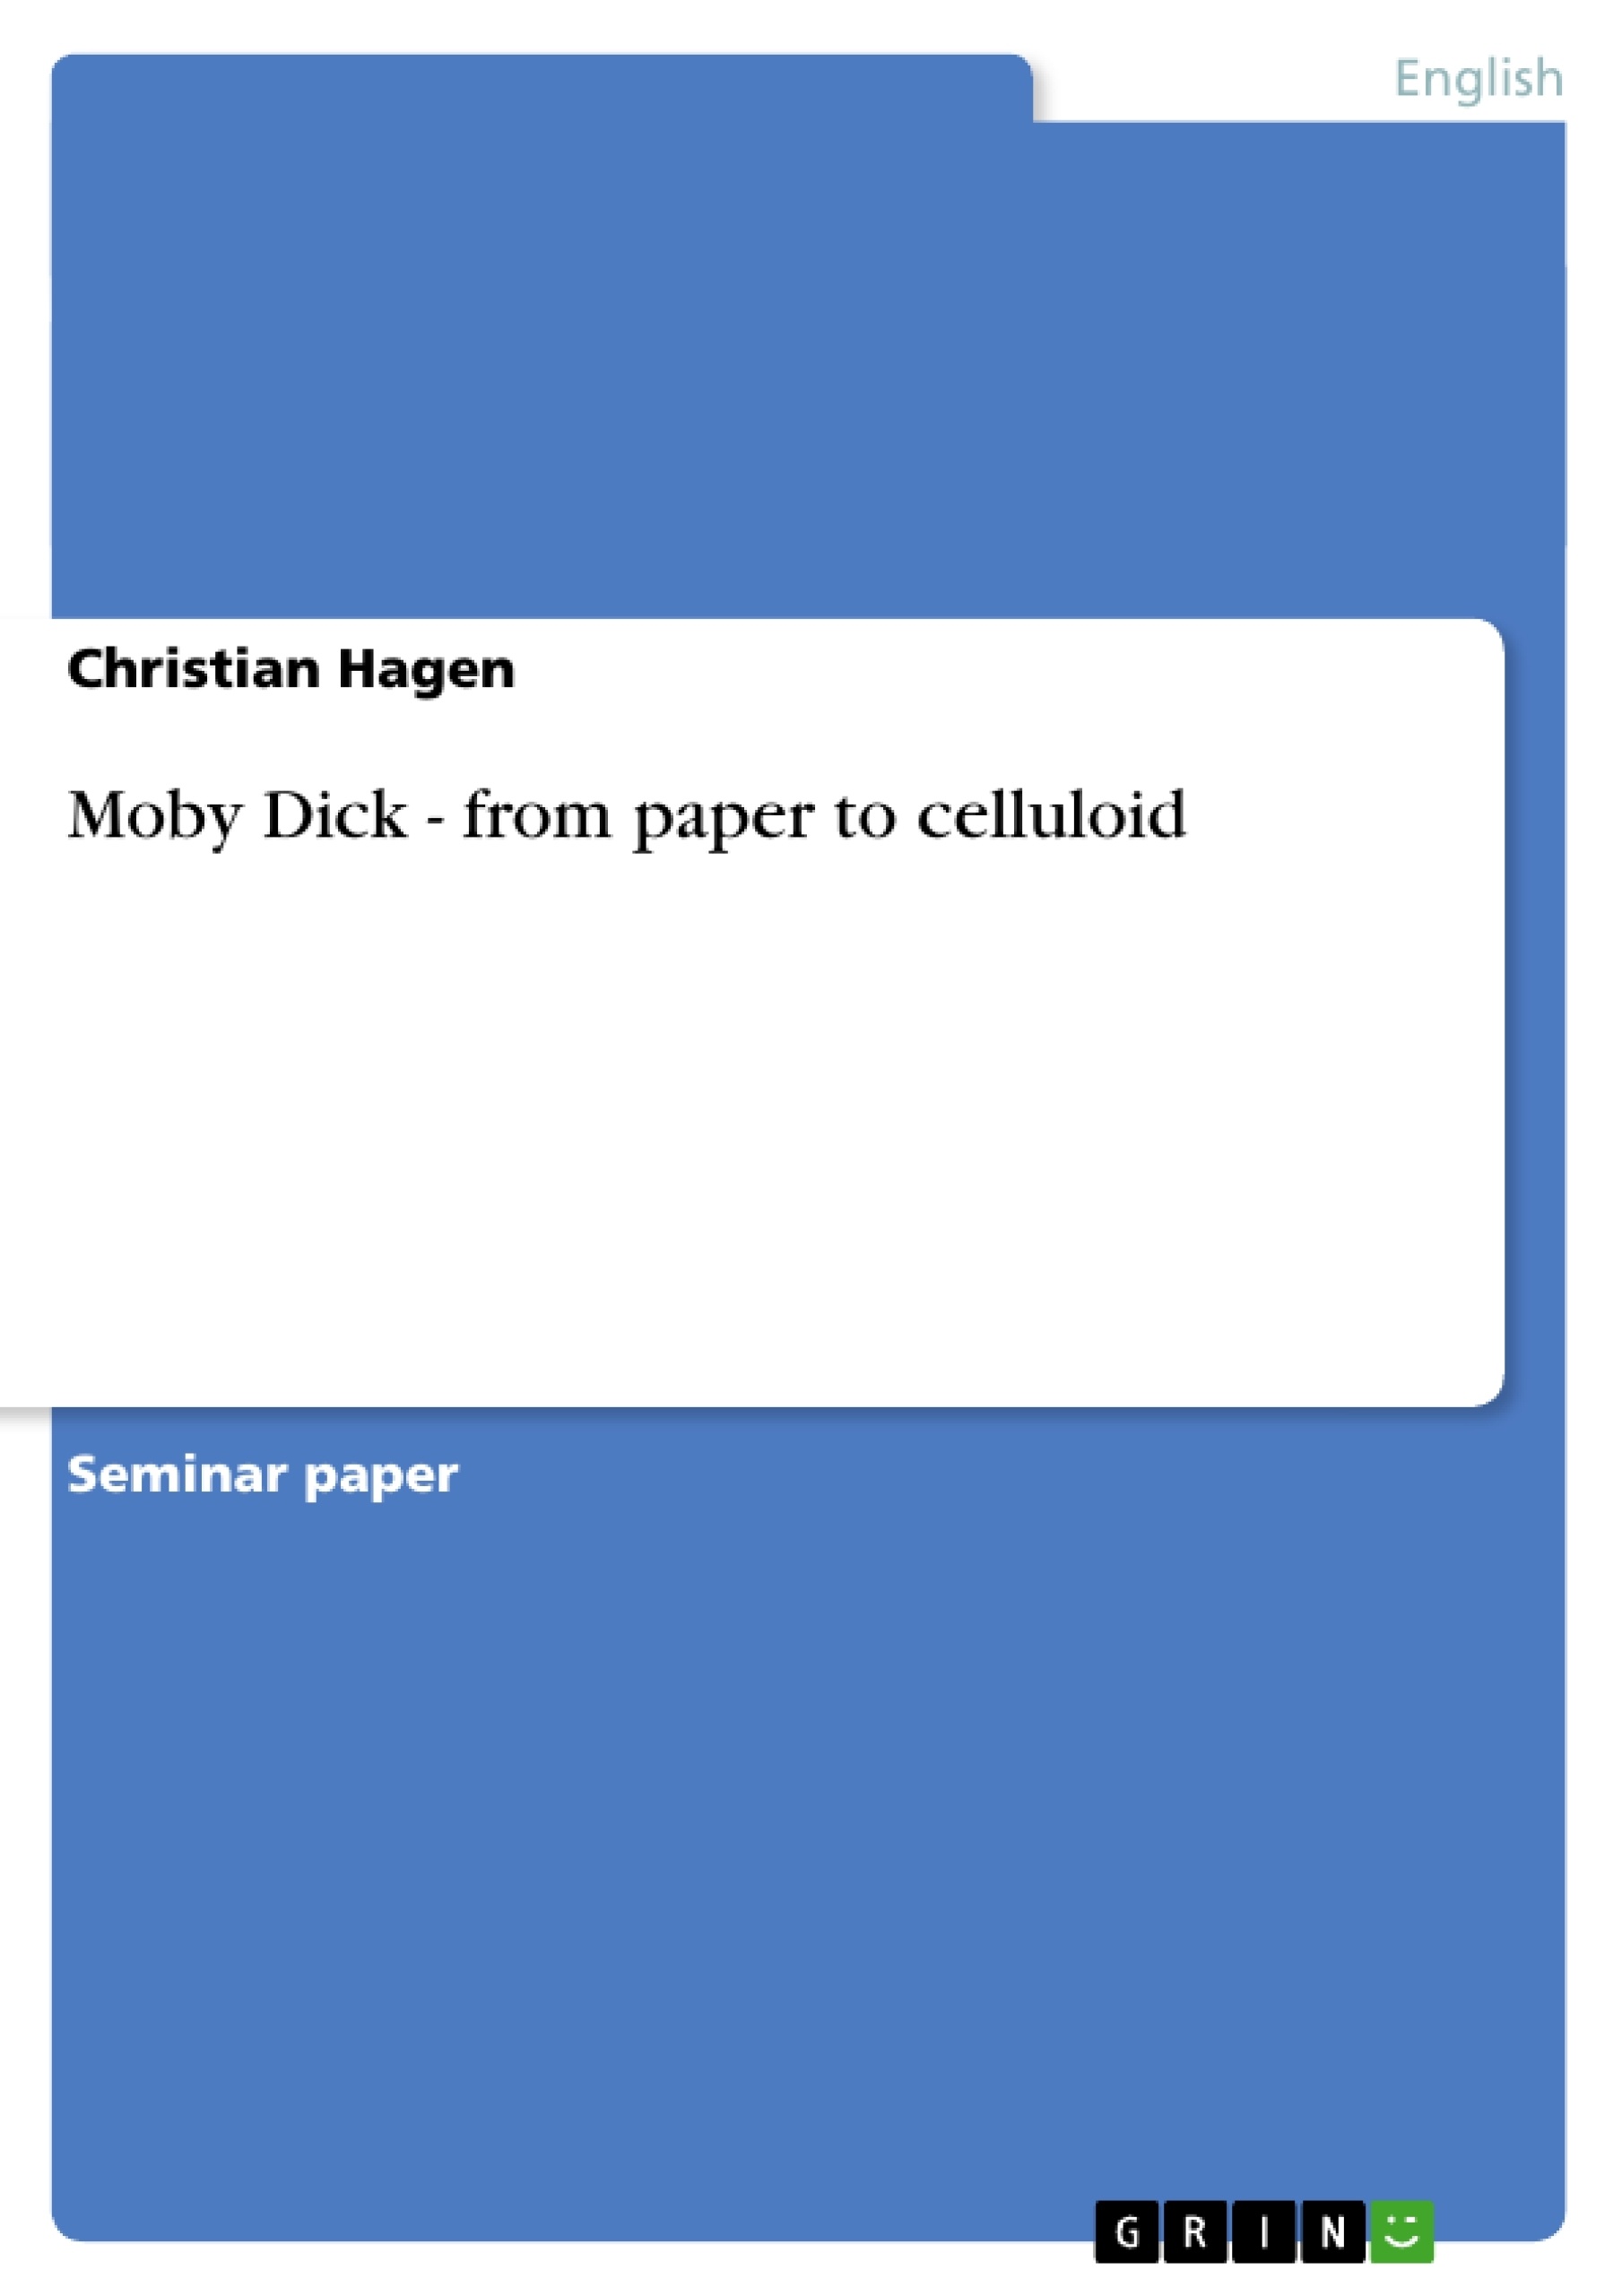 Research paper topics moby dick